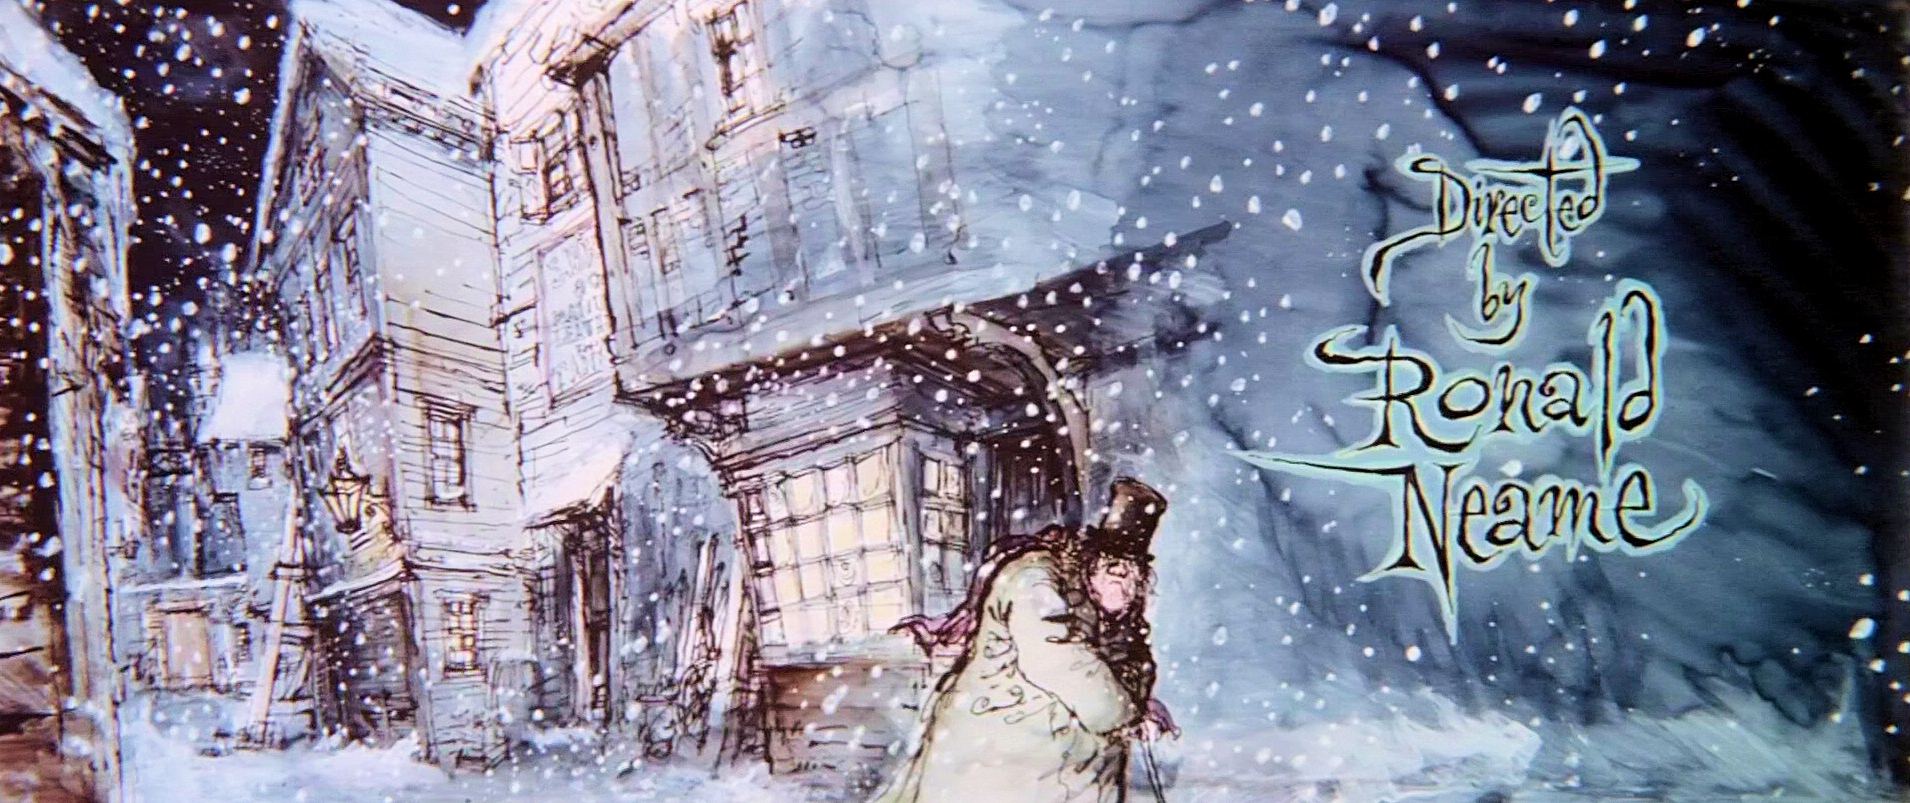 Main title from Scrooge (1970) (28). Directed by Ronald Neame